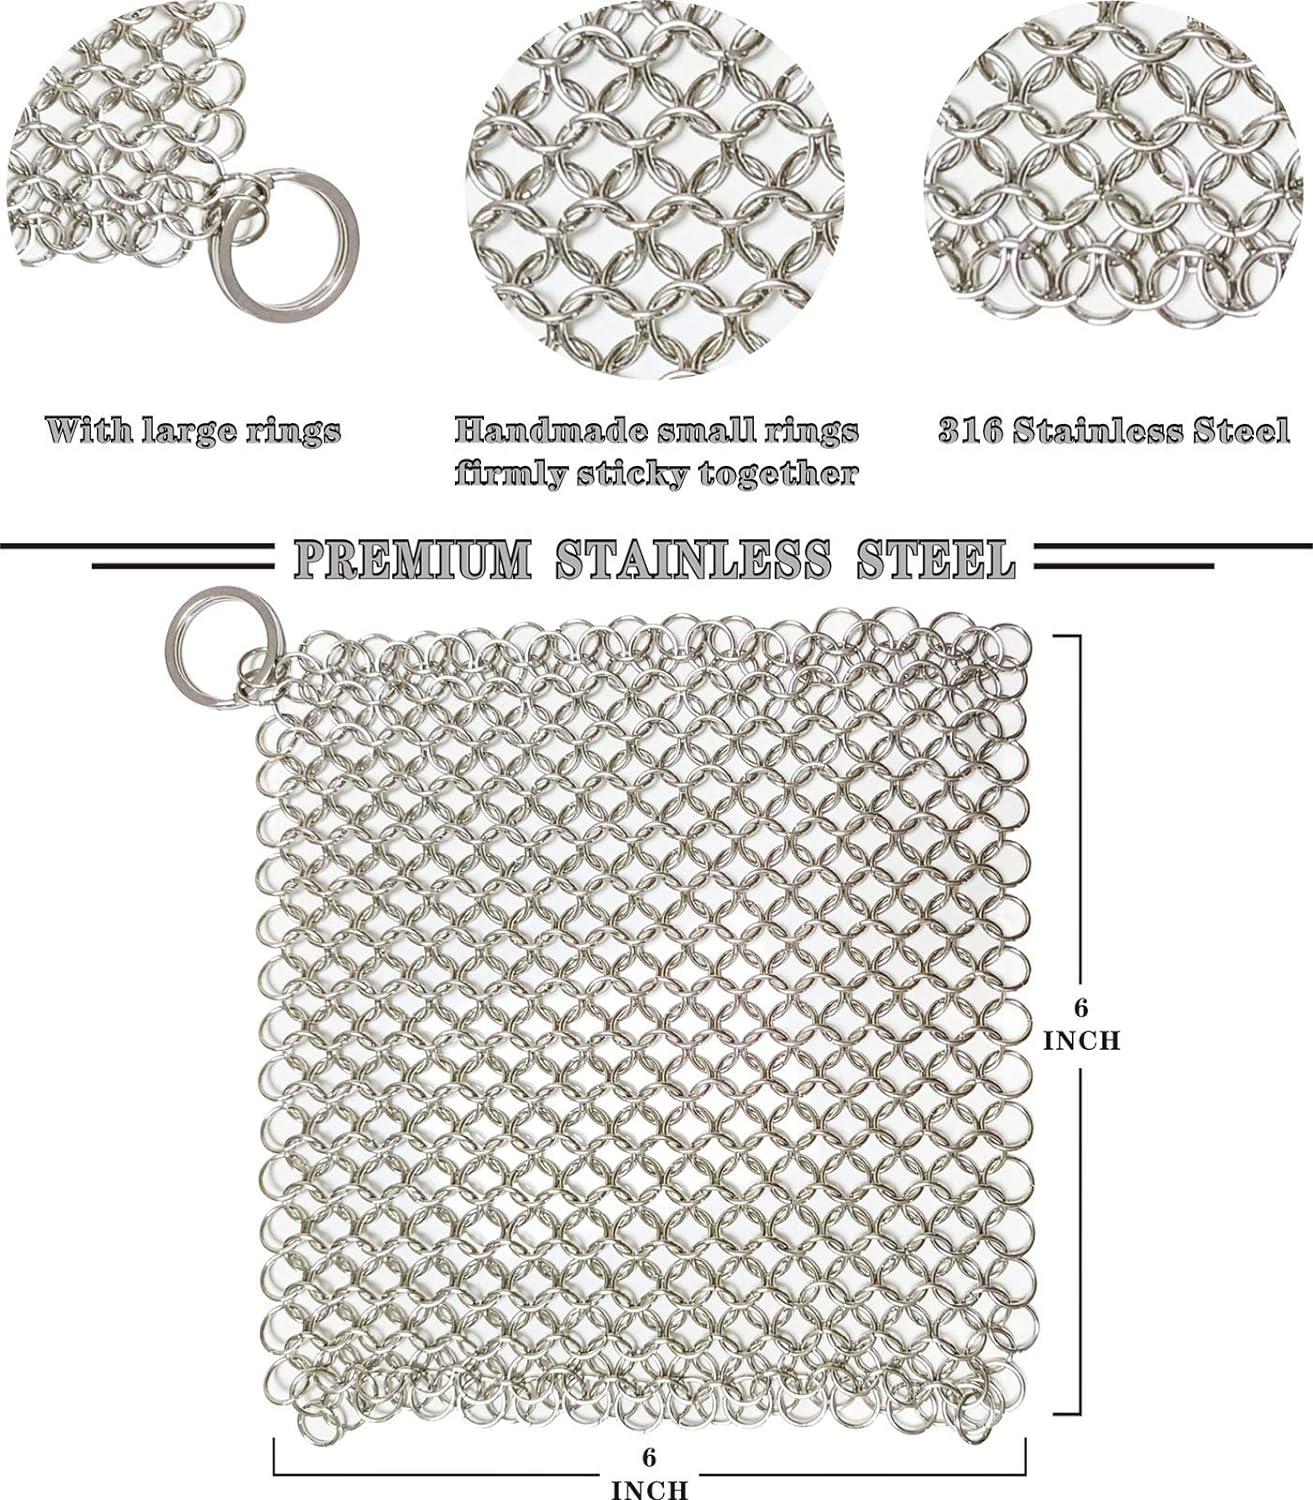 Chainmail Scrubber Cast Iron Stainless Steal Scrubber Must Have ! 